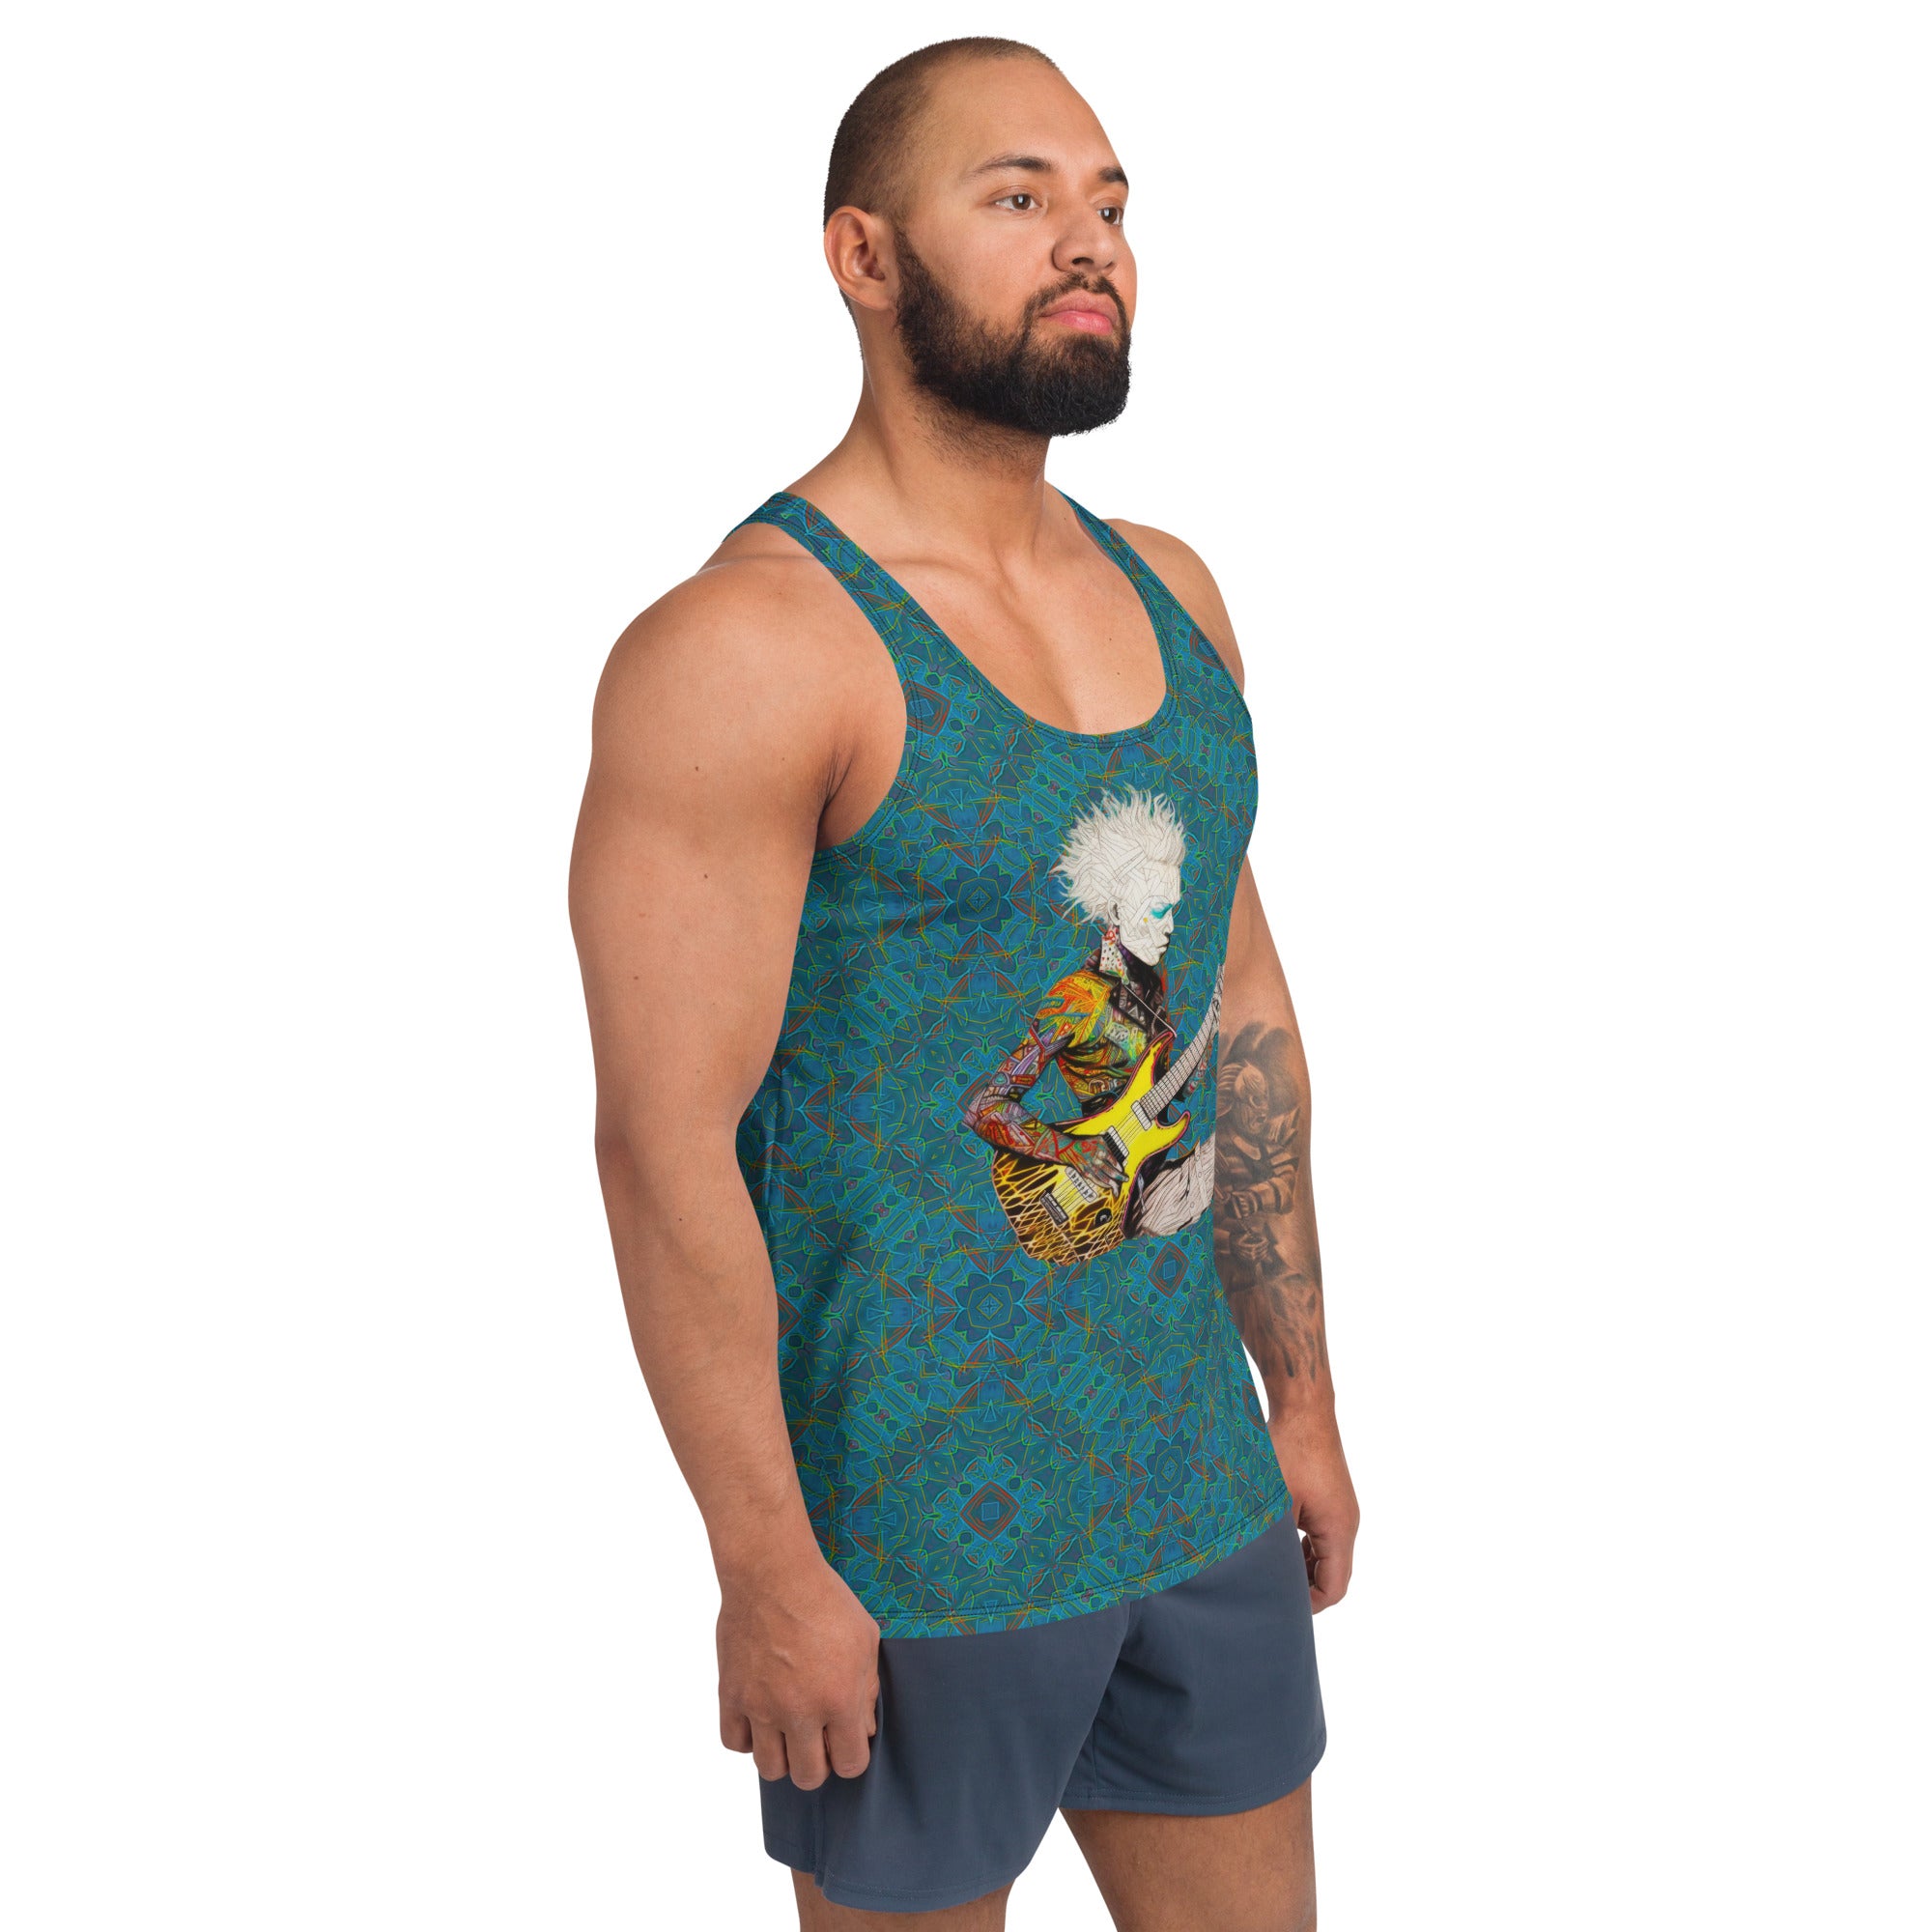 Pop culture-inspired men's tank top, perfect for casual wear.